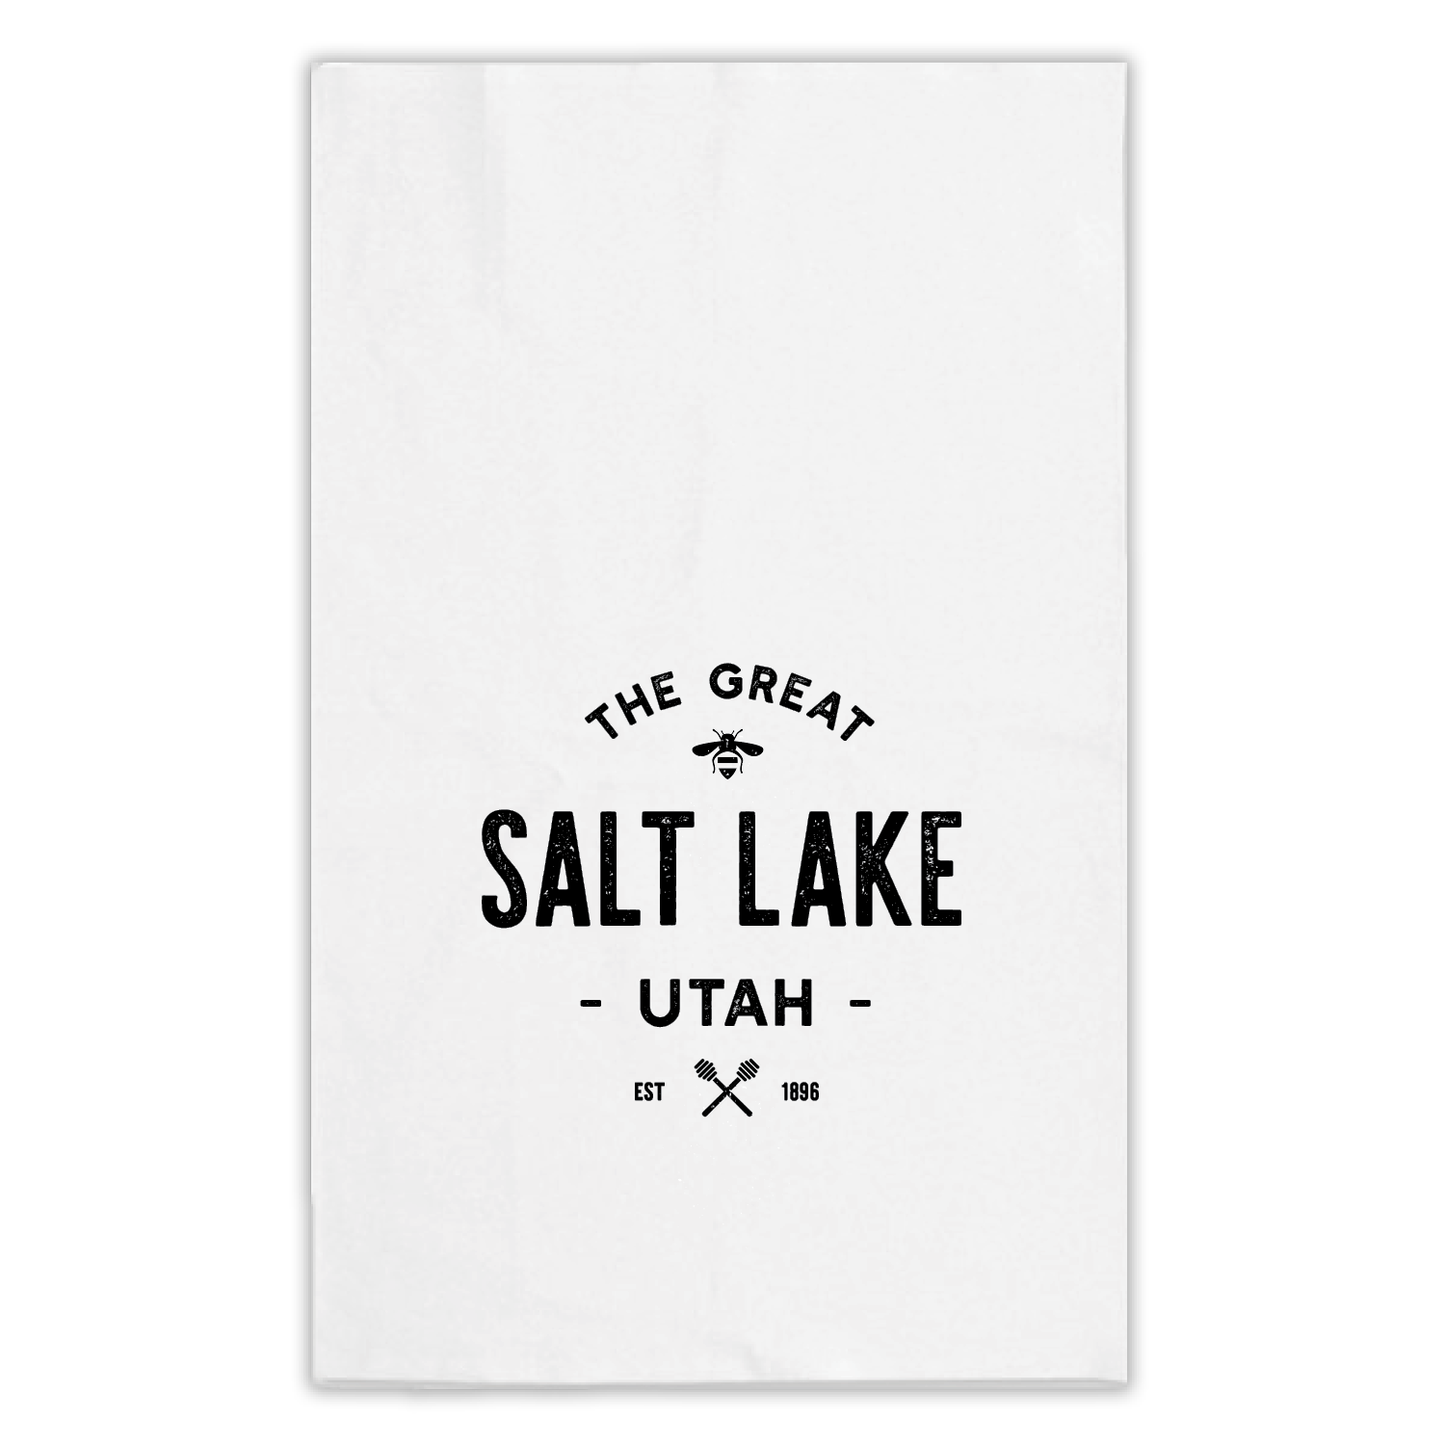 The Great Salt Lake tea towel with a cute bee and honey dipper details